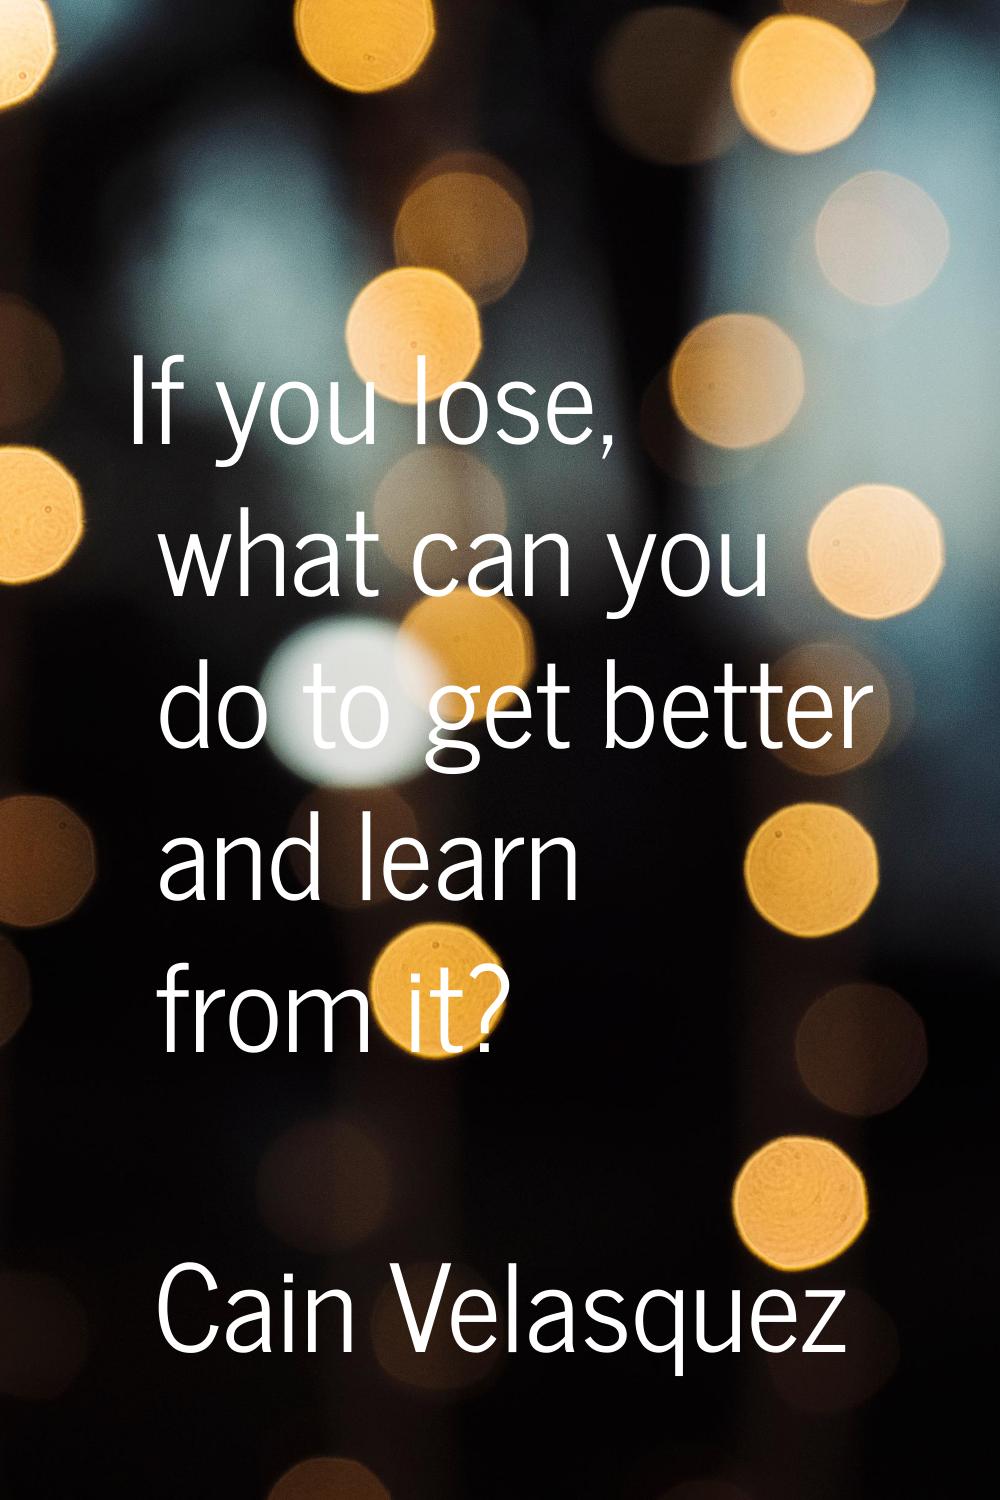 If you lose, what can you do to get better and learn from it?